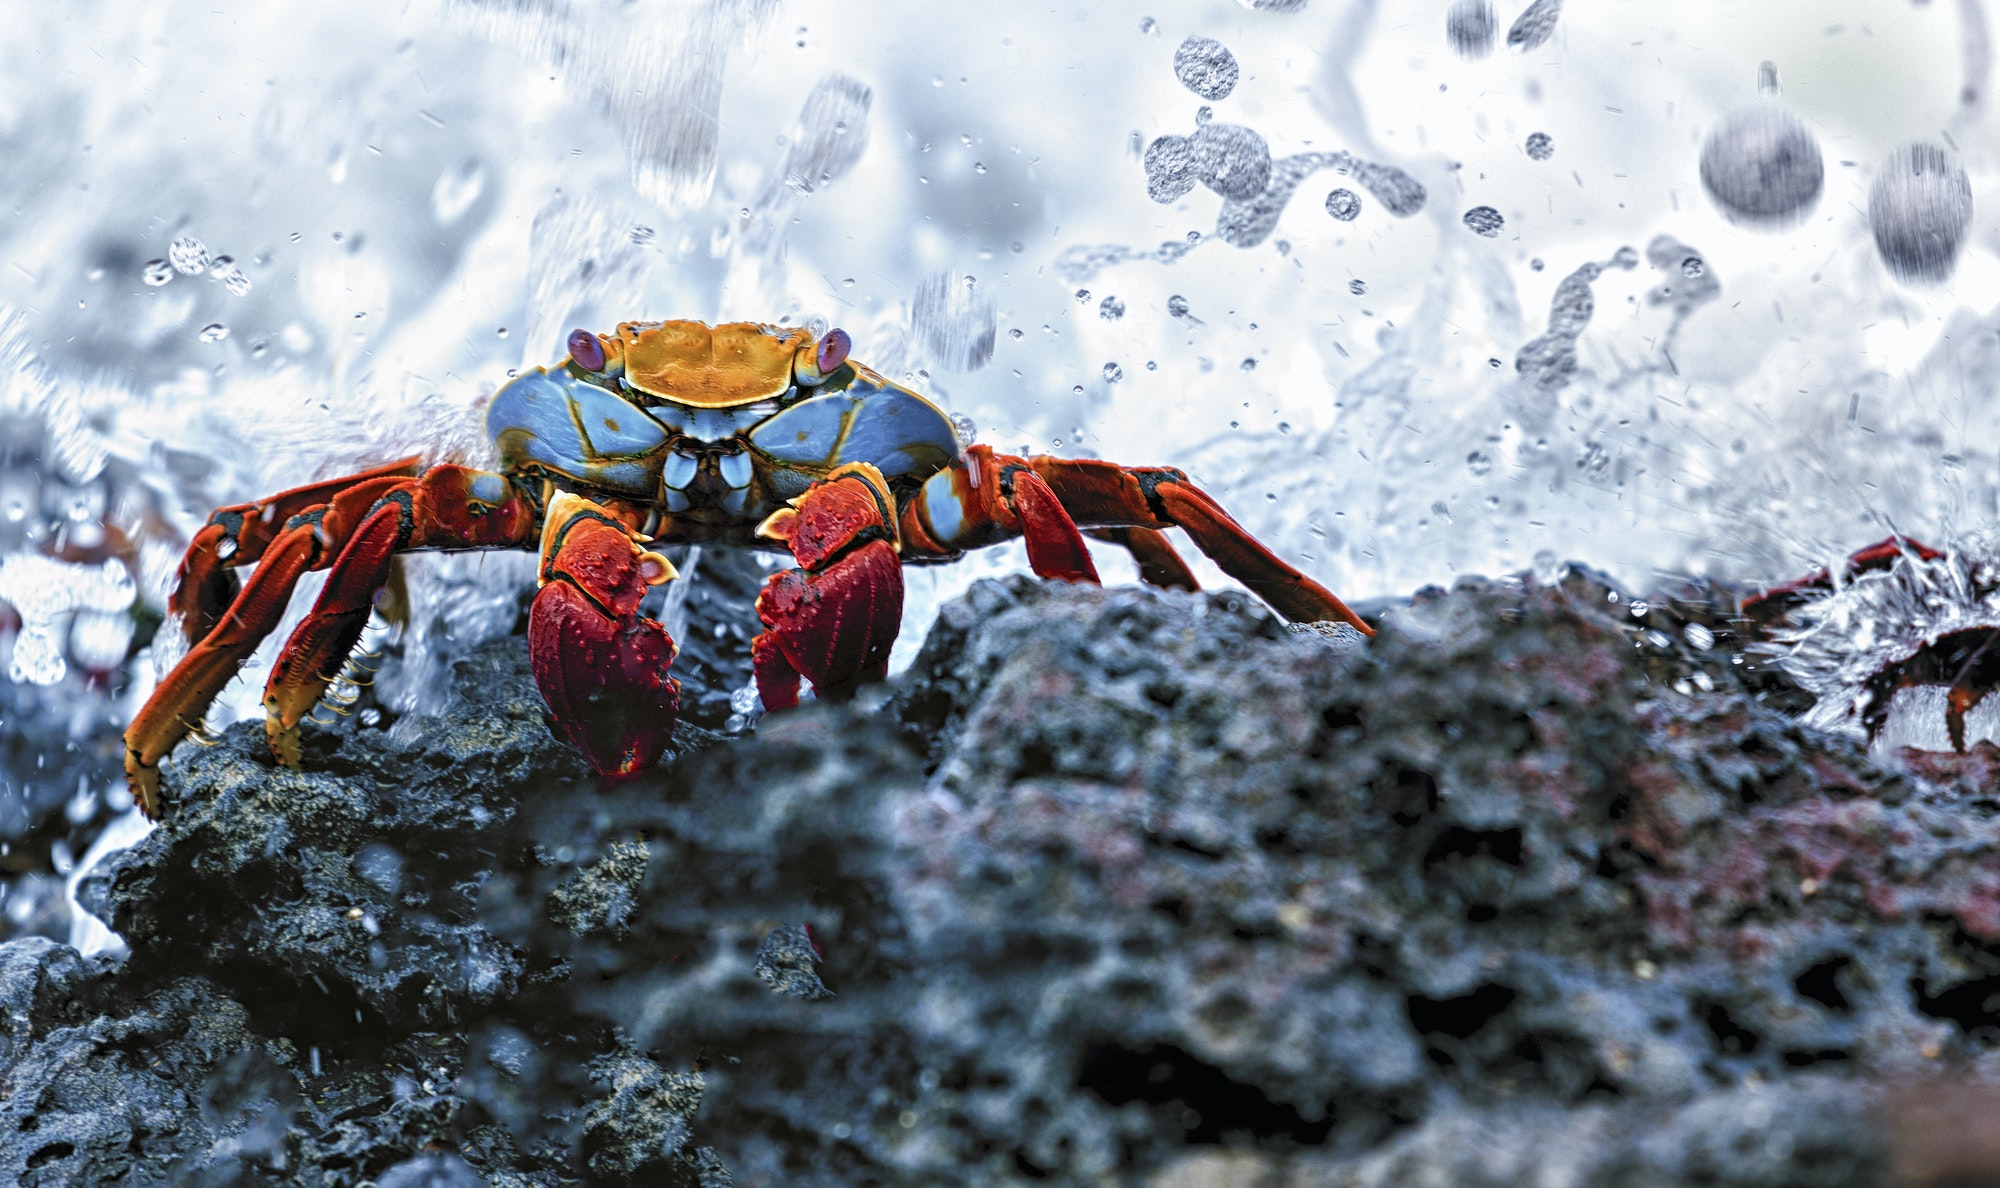 Sally Lightfoot Crab, Grapsus grapsus found in the Galapagos Islands.